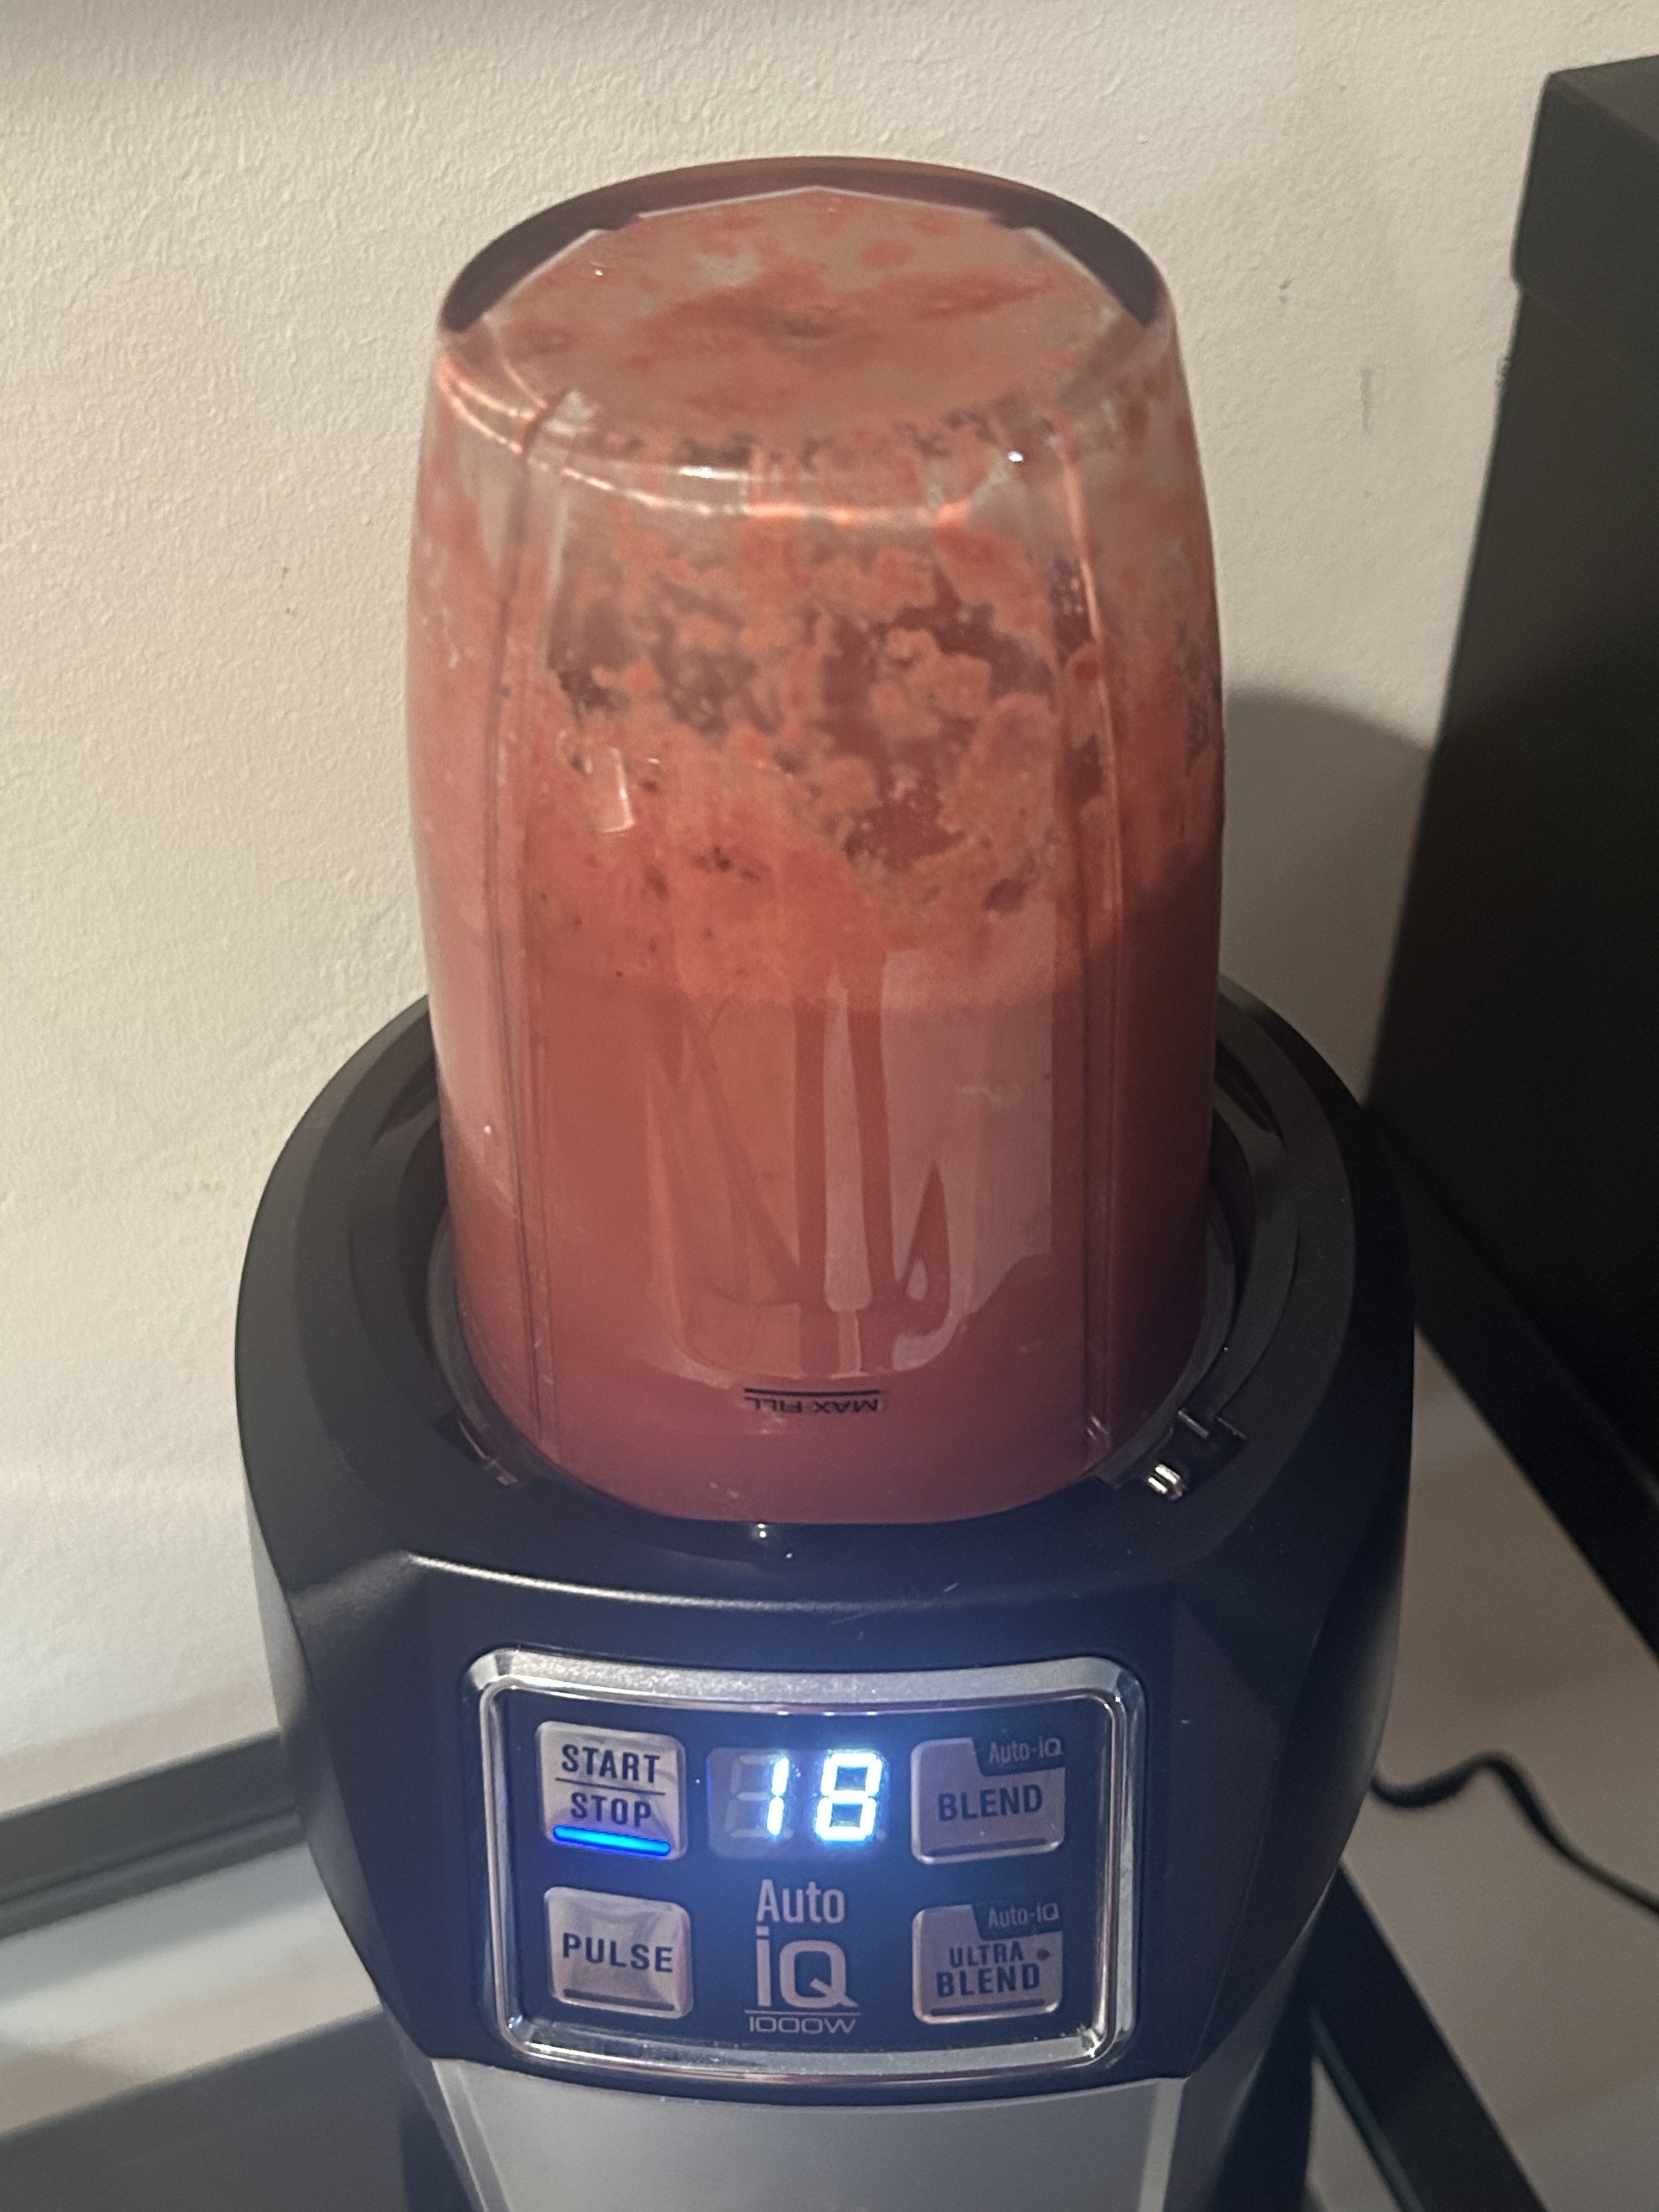 A blender is turned on and a smoothie is being made